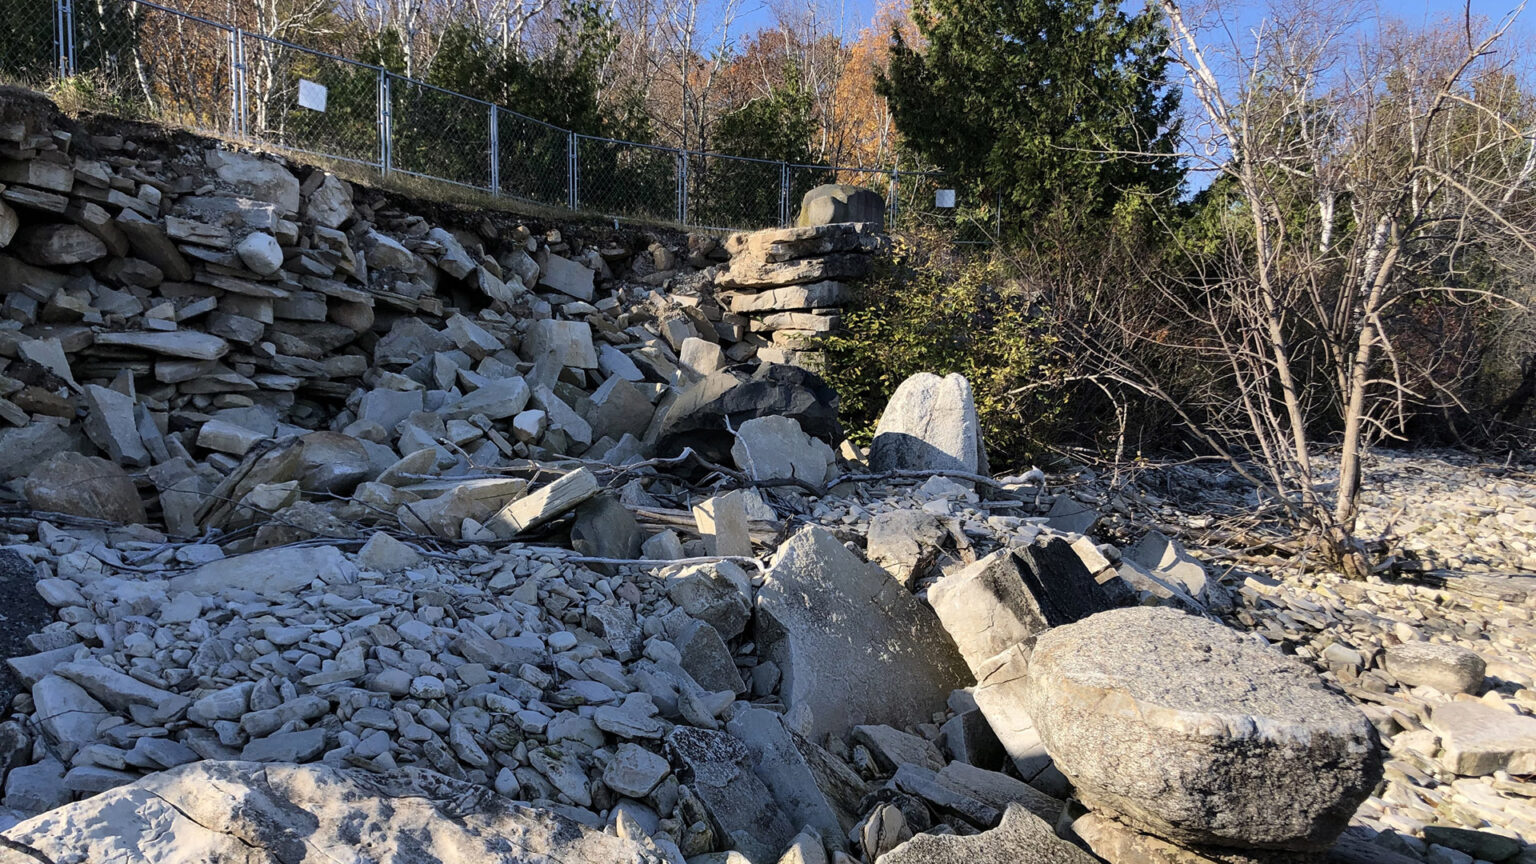 A pile of stones marks where a loose masonry retaining wall is damaged along a shoreline, with trees in the background.